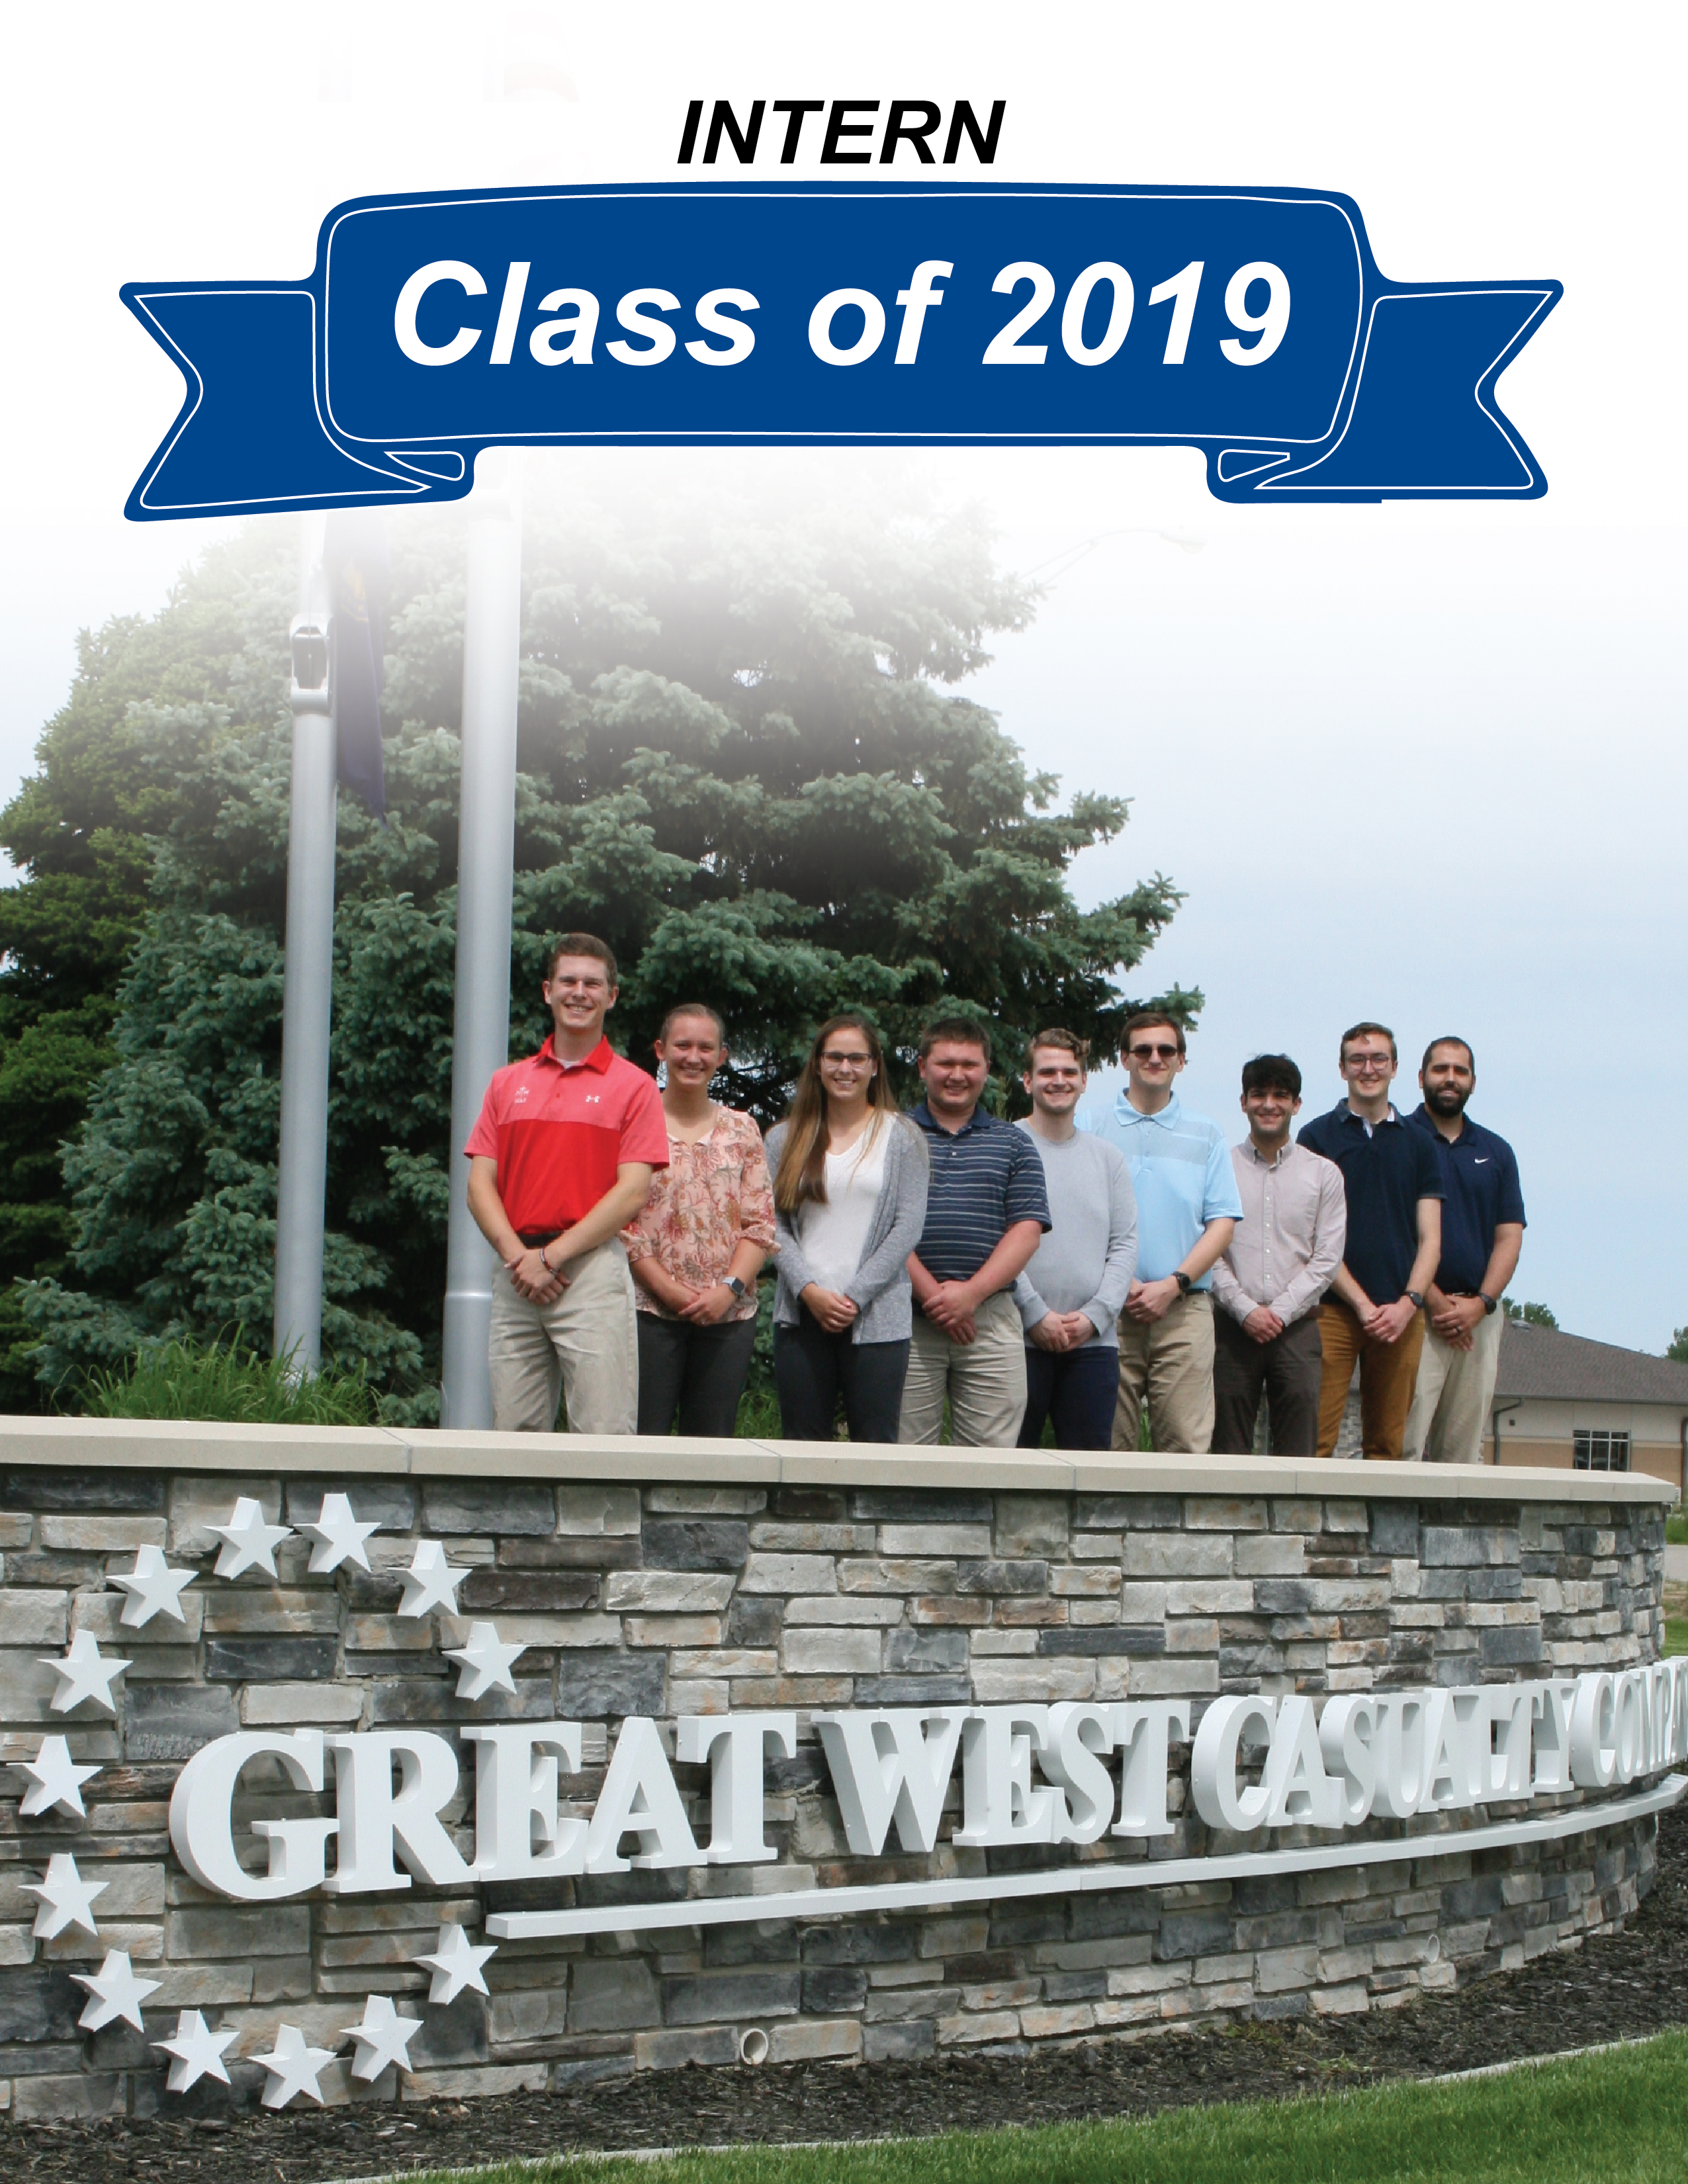 Great West Casualty Company 2019 Intern Class